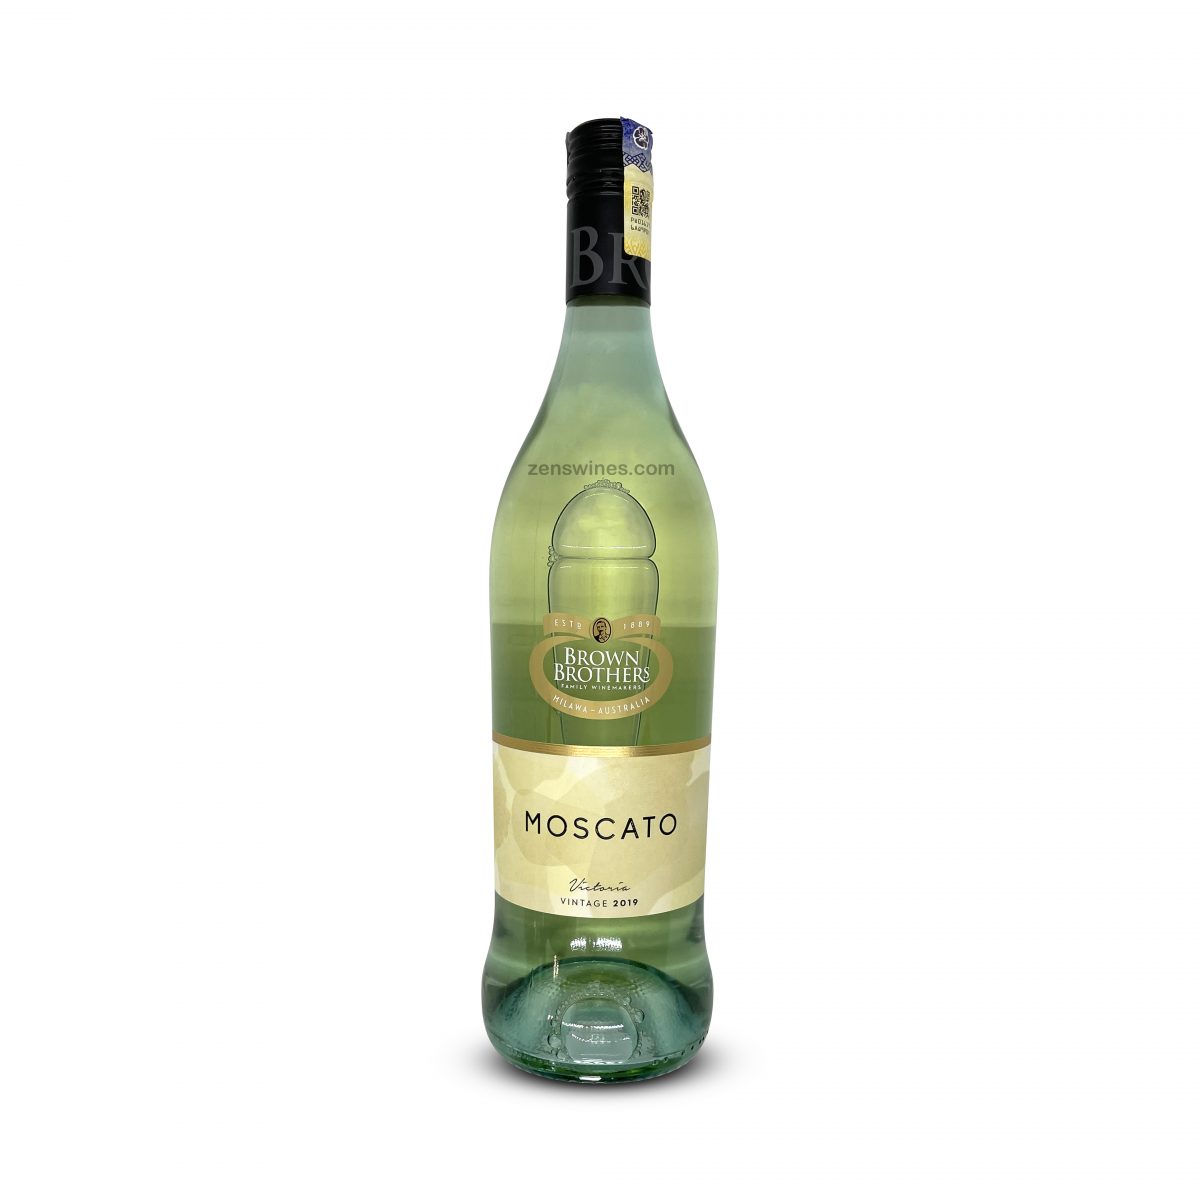 BROWN BROTHER MOSCATO 2019 RM79